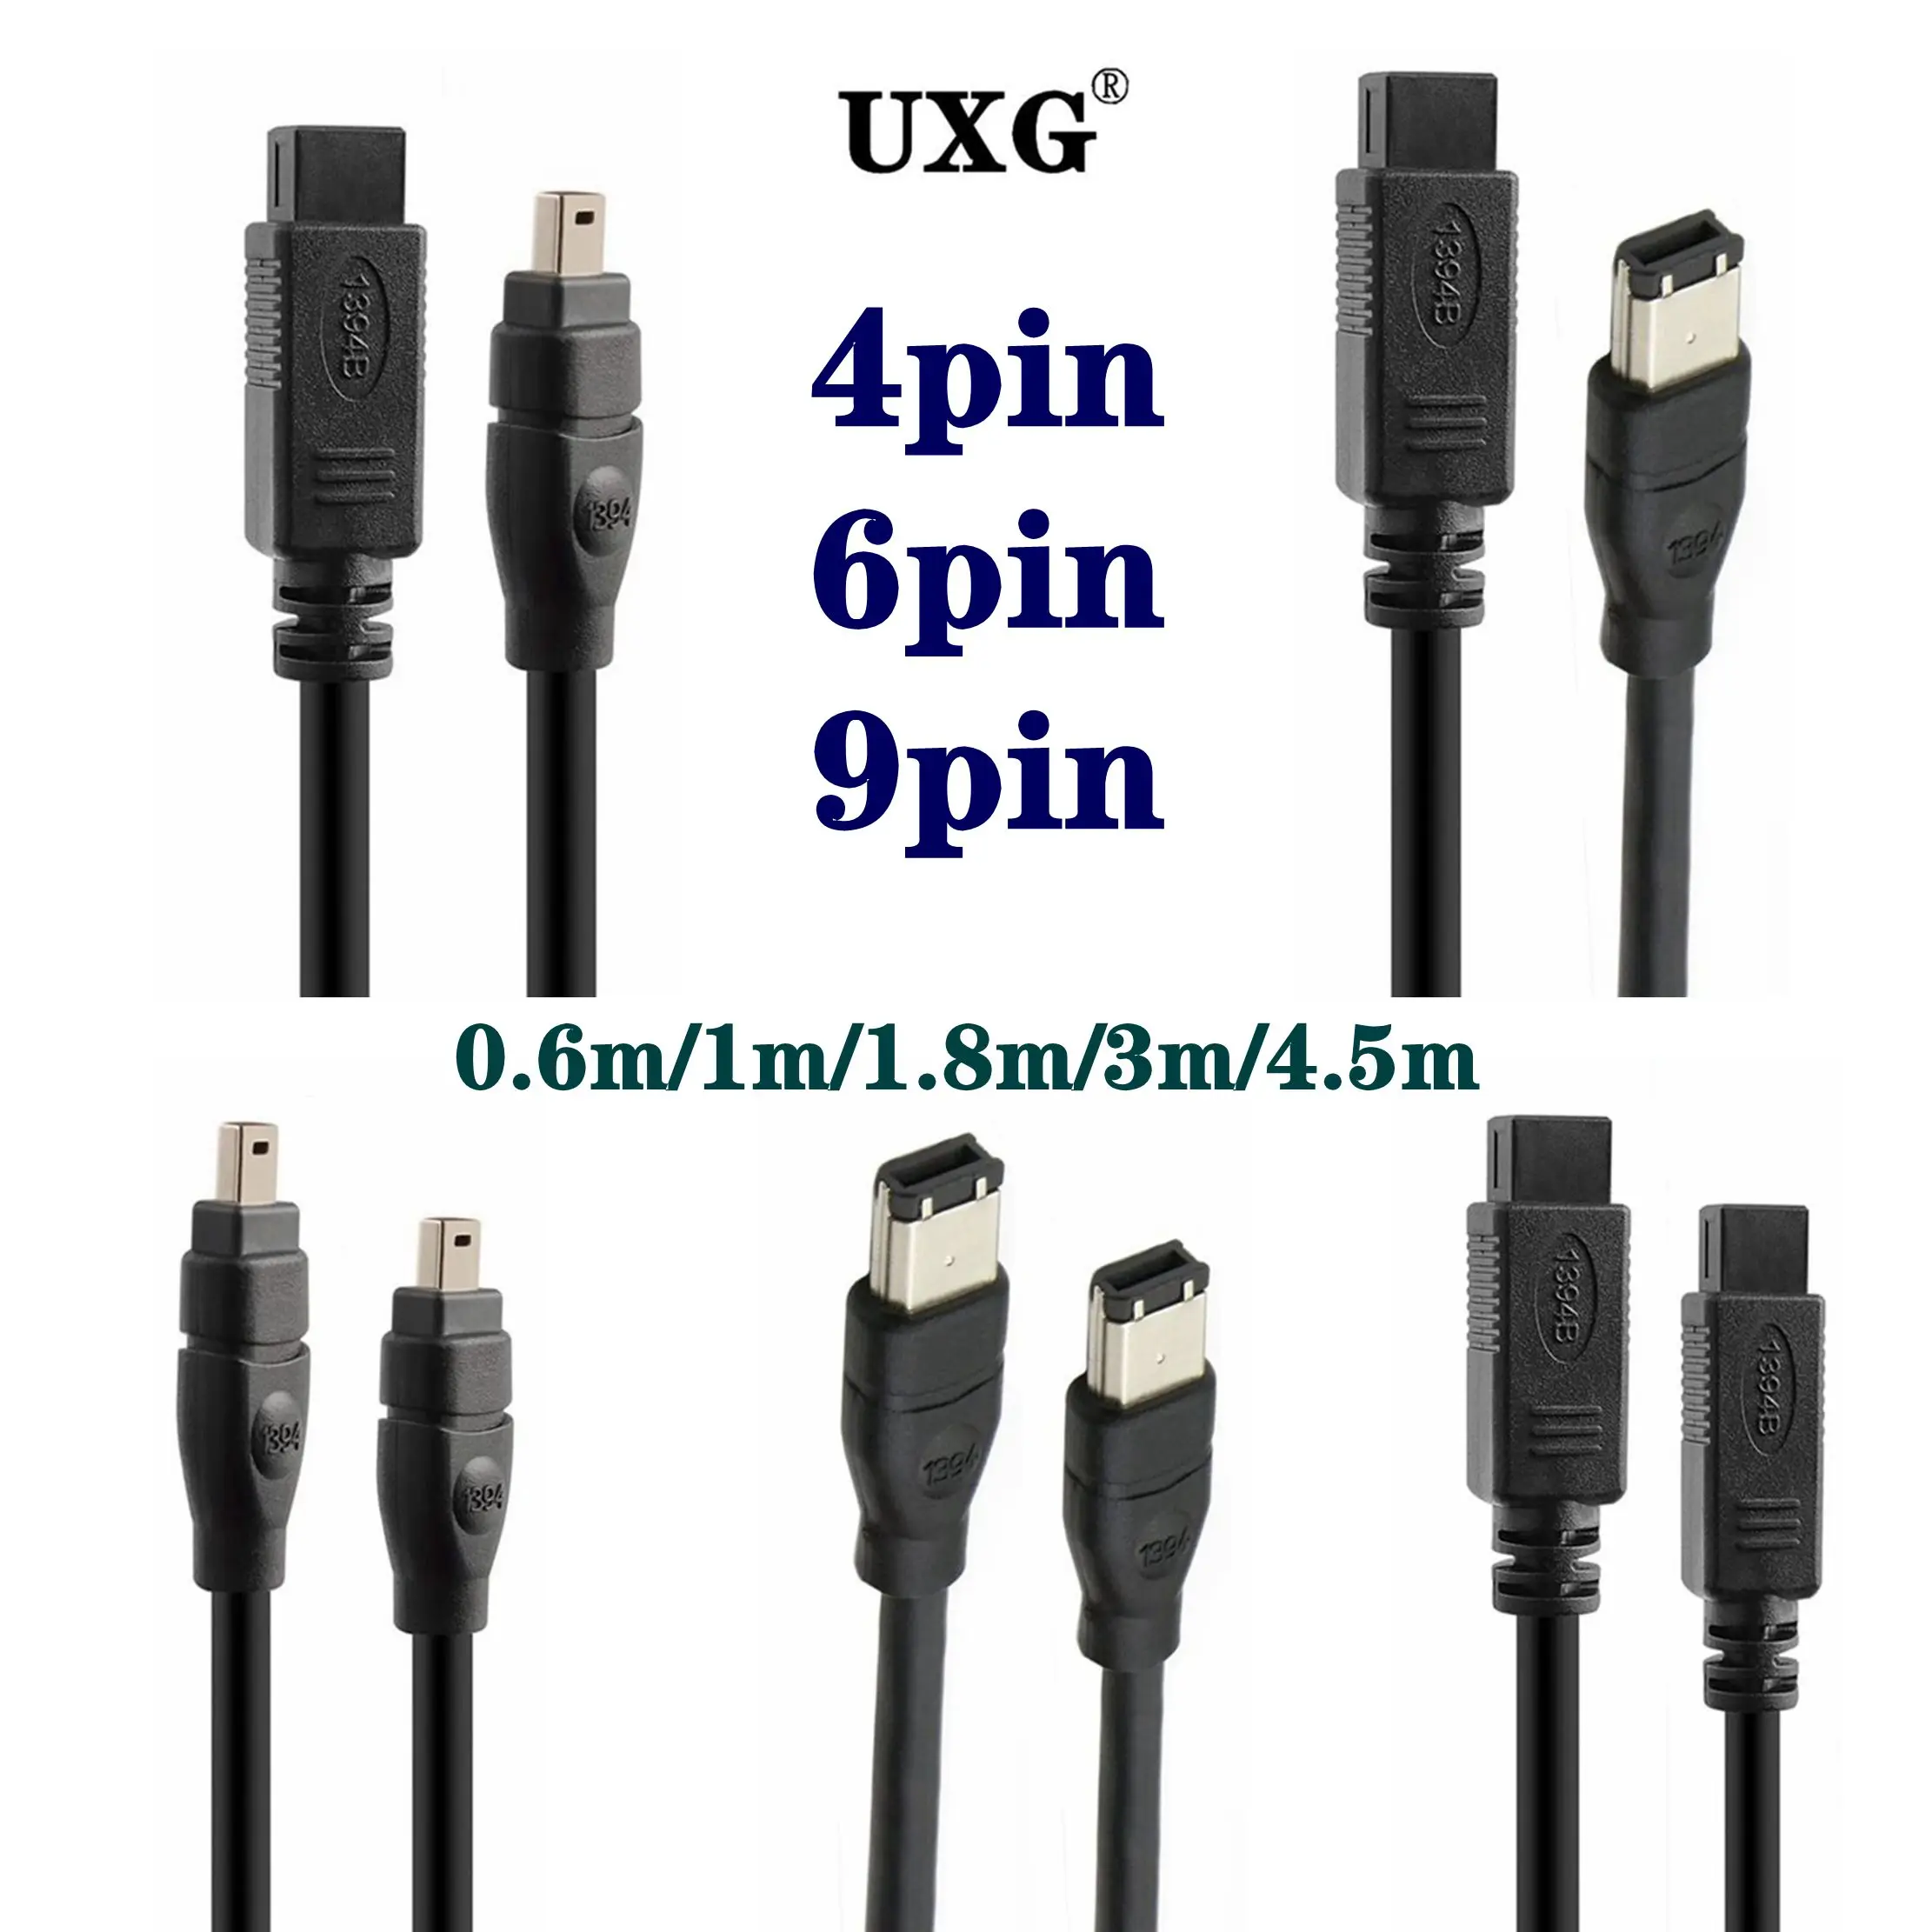 

5M 3M 1.8M 1m 0.6M IEEE 1394 FireWire 800 - FireWire 400 Cable 9pin To 9pin 6pin 4pin & 6pin 4pin To 4pin ILink IEEE 1394B Cable